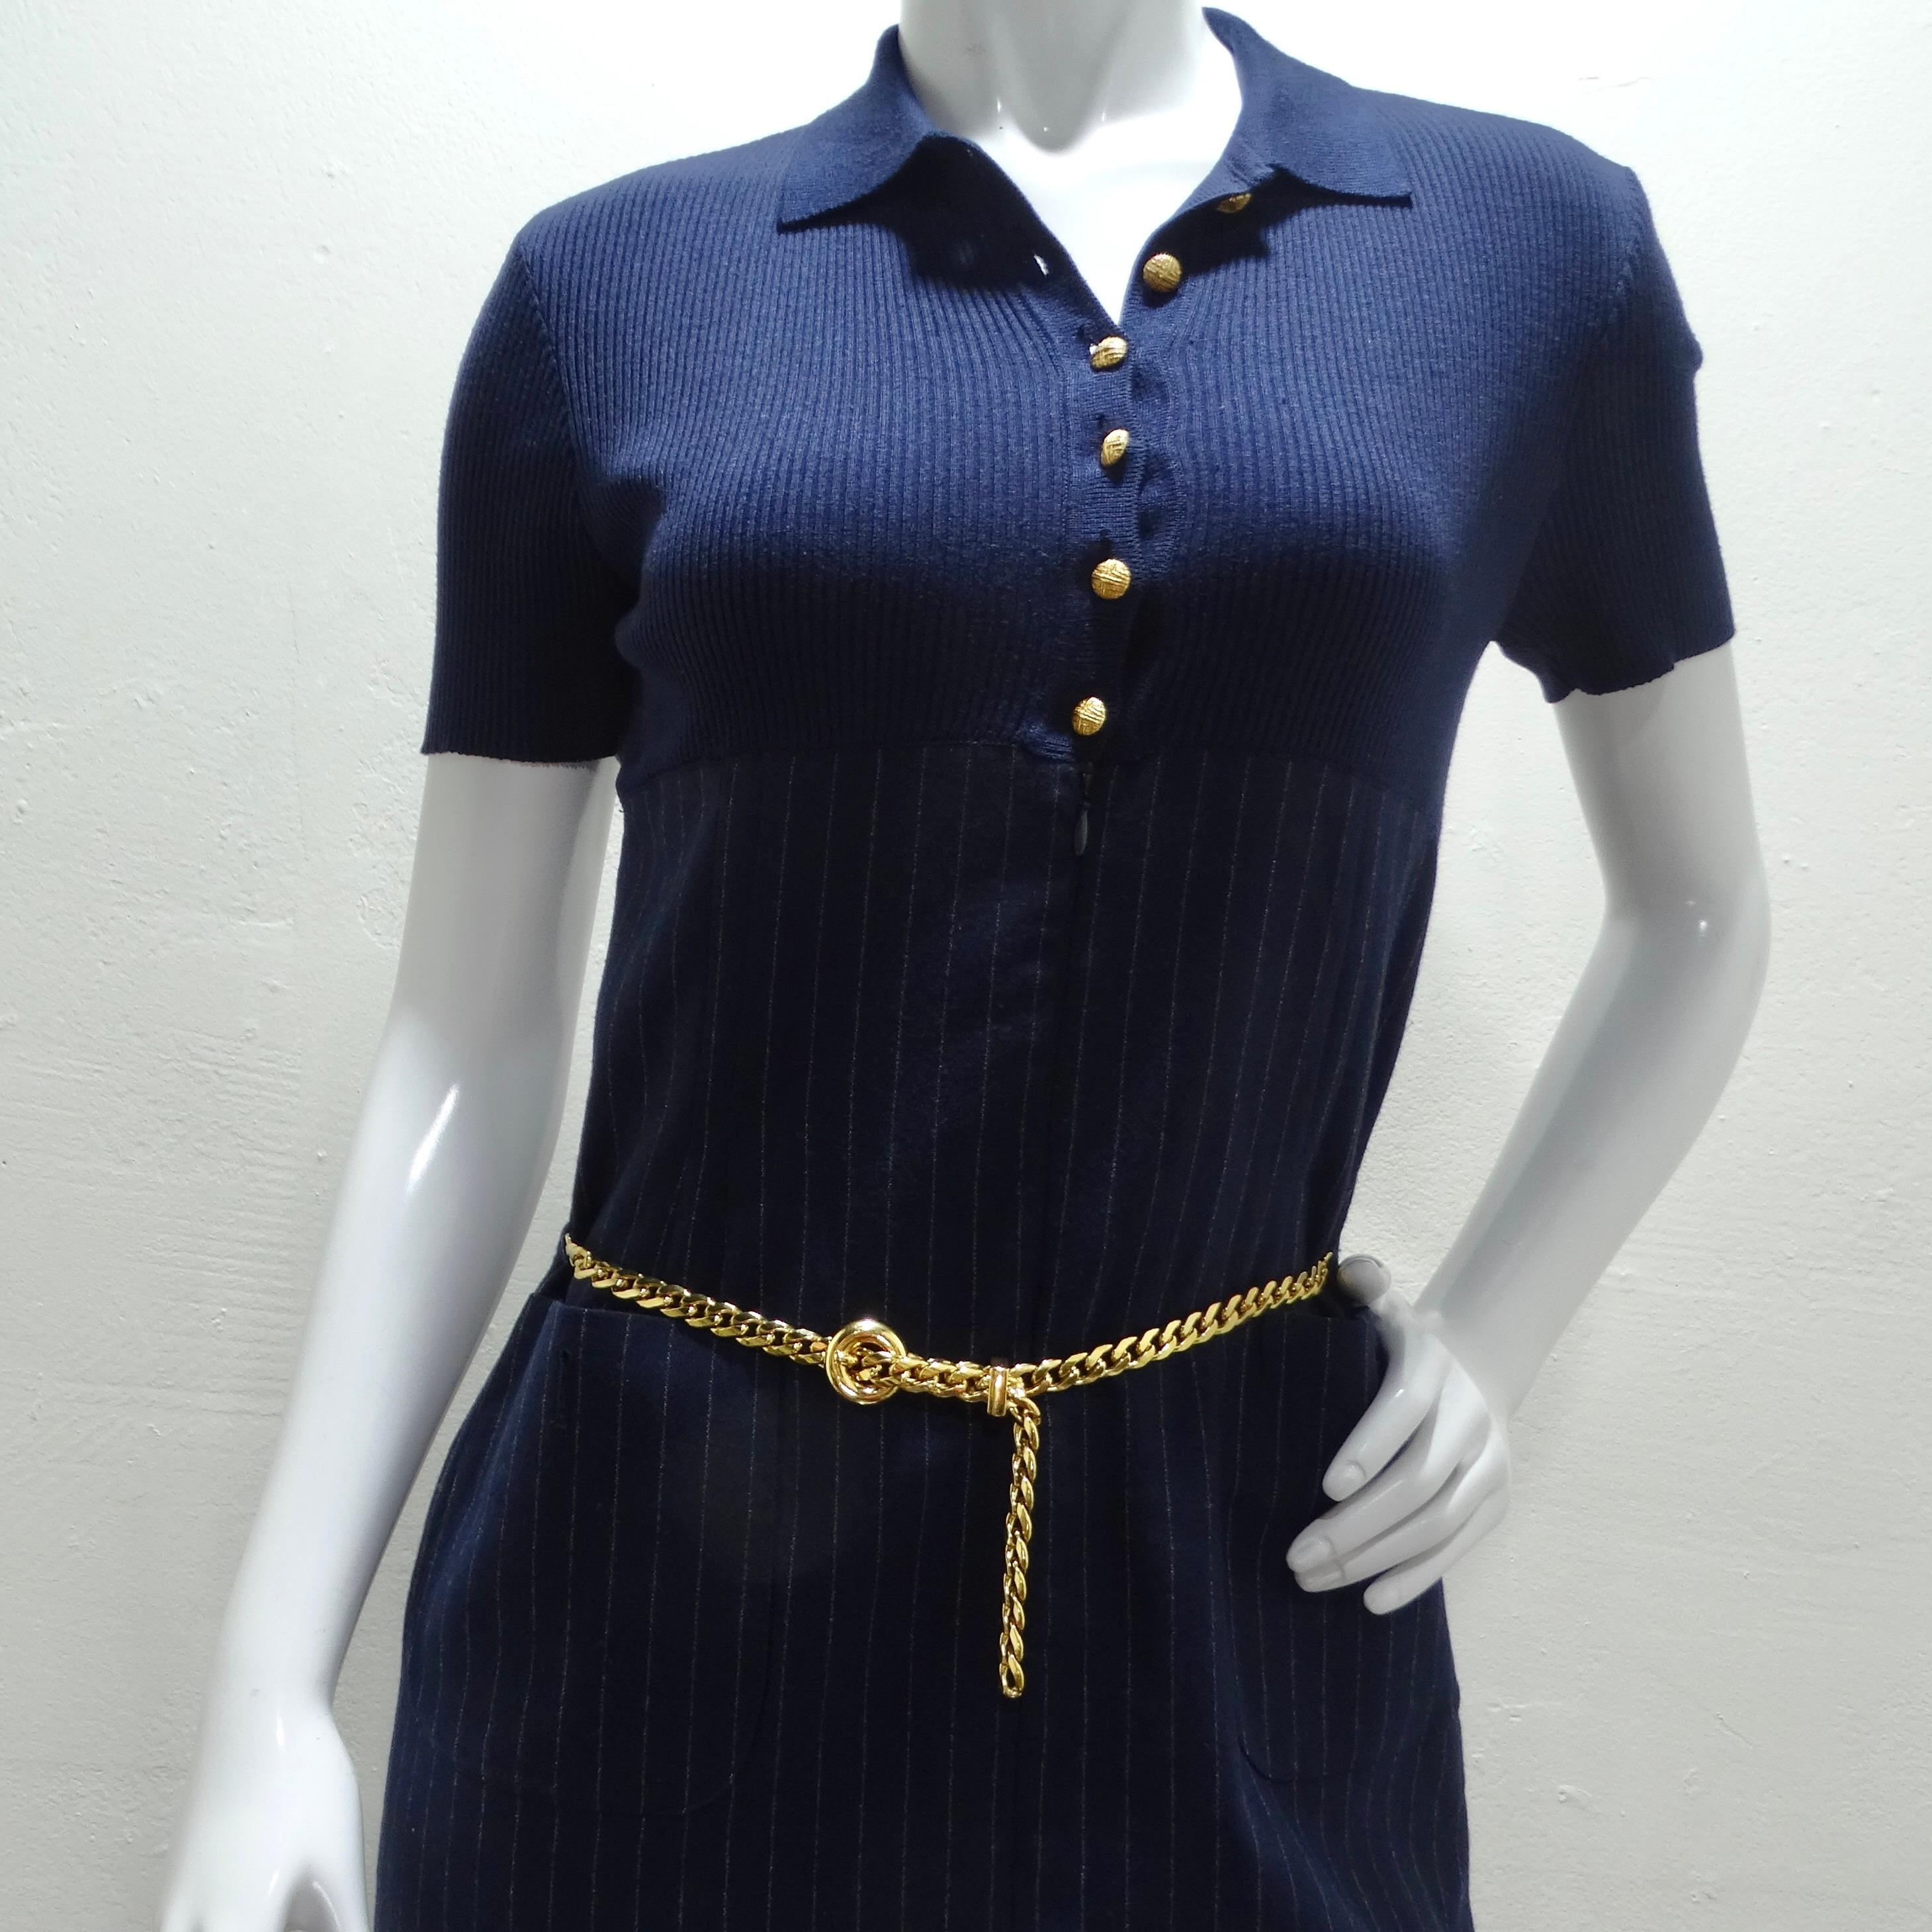 Valentino 1980s Pinstripe Chain Link Belted Midi Dress In Good Condition For Sale In Scottsdale, AZ